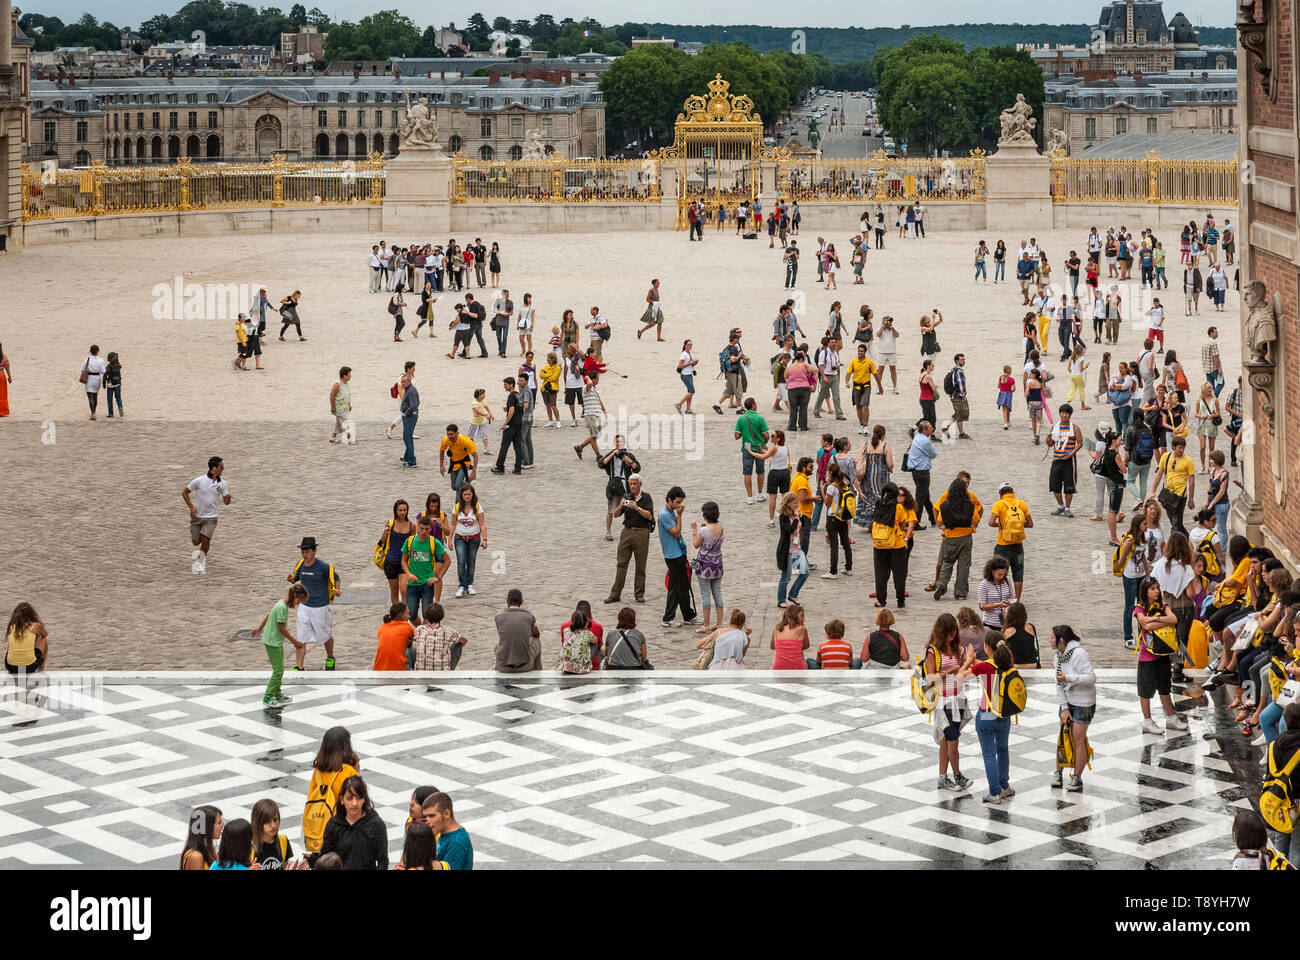 Tourist crowds on the square in front of the Palace of Versailles Stock Photo